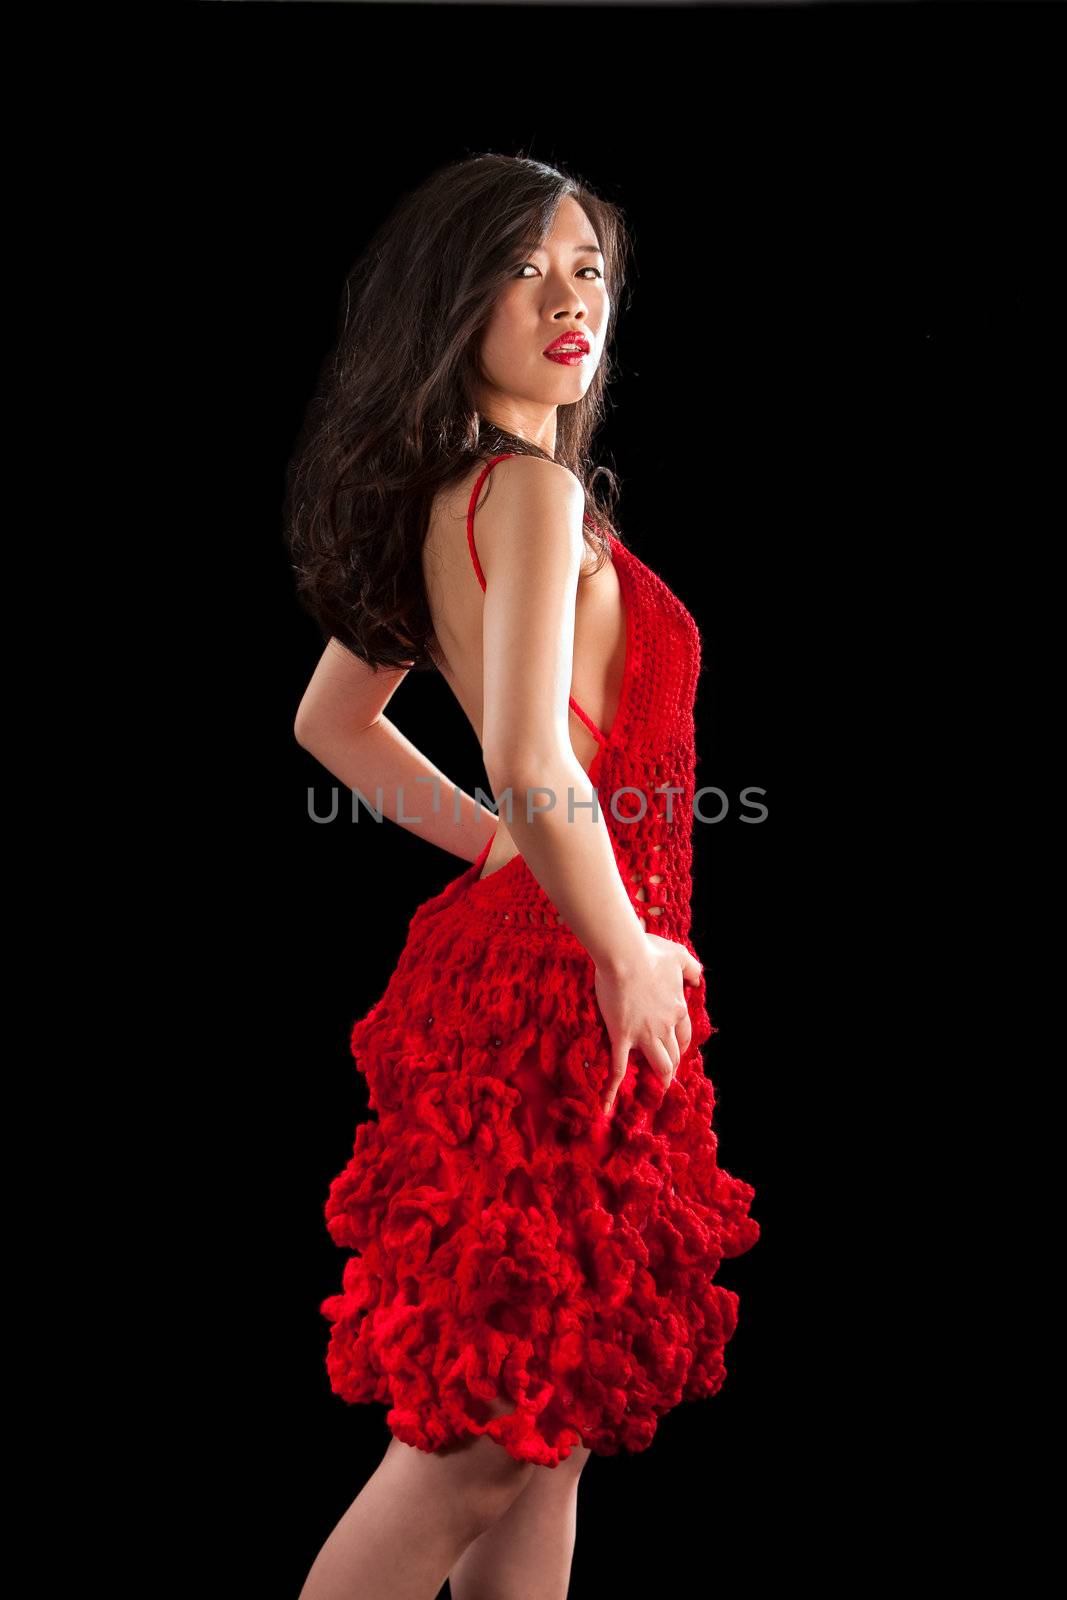 Asian woman in red crochet dress by phakimata